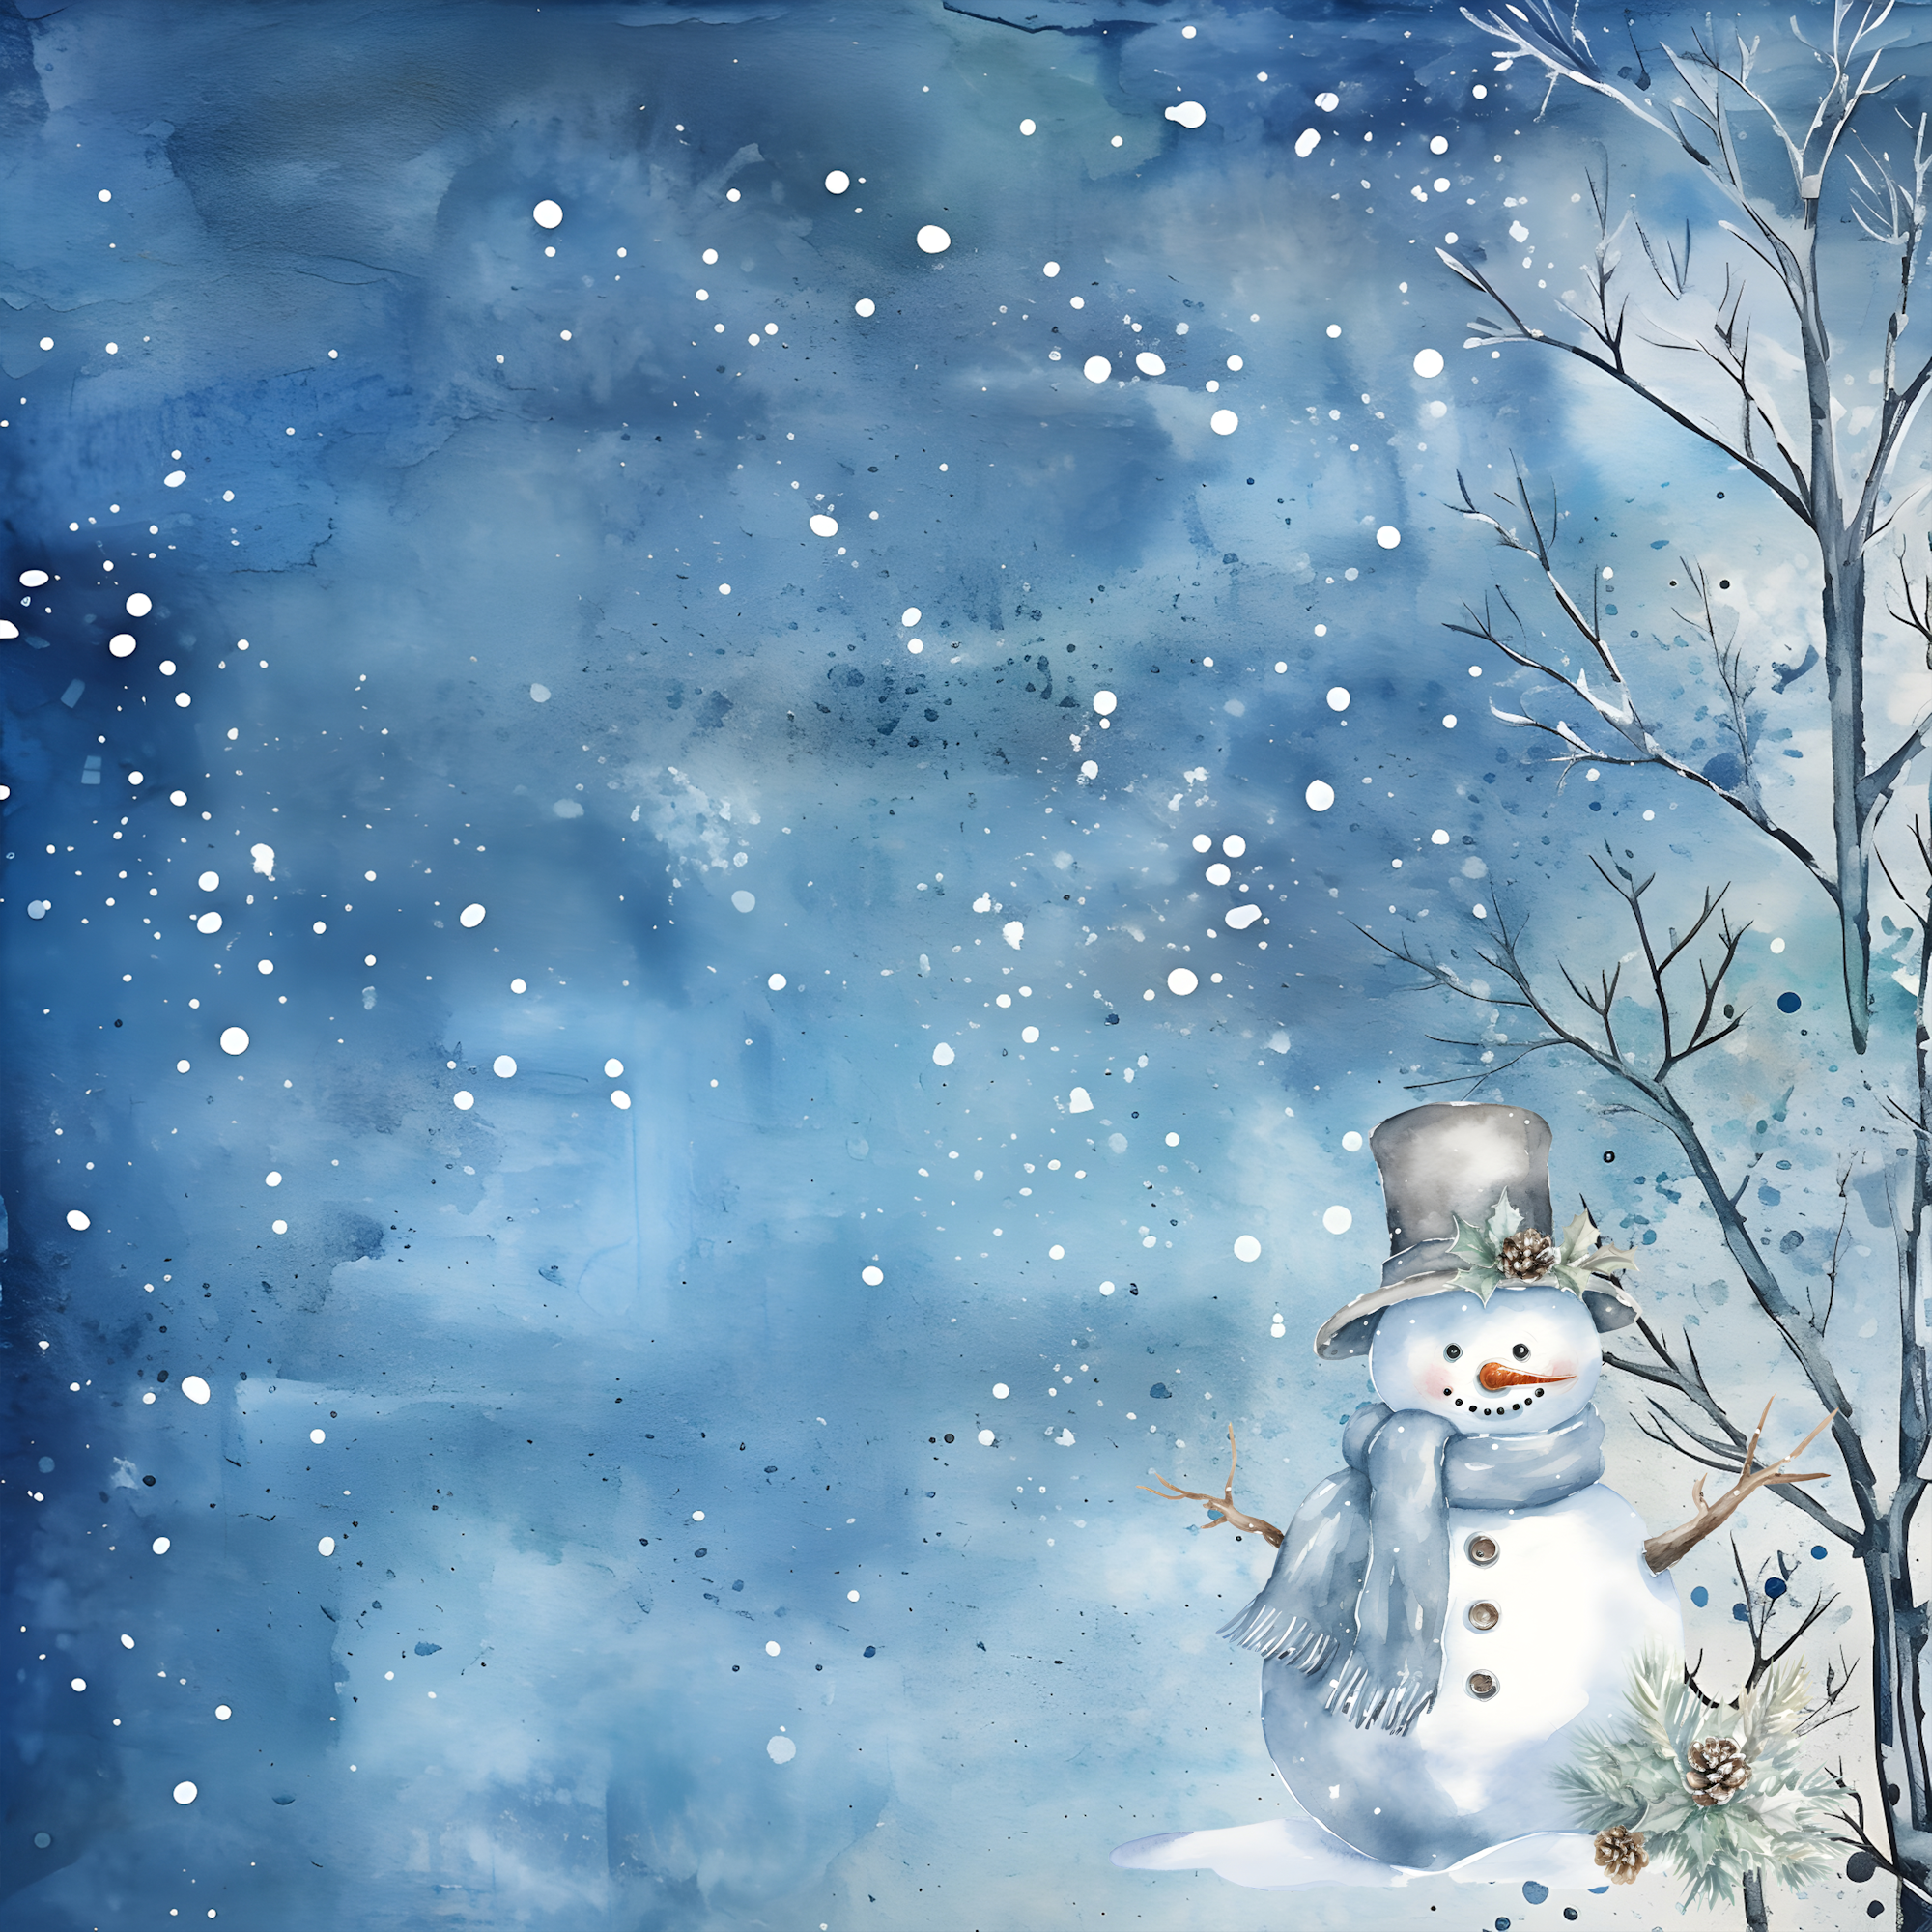 Wonderful Winter Collection Winter Christmas 12 x 12 Double-Sided Scrapbook Paper by SSC Designs